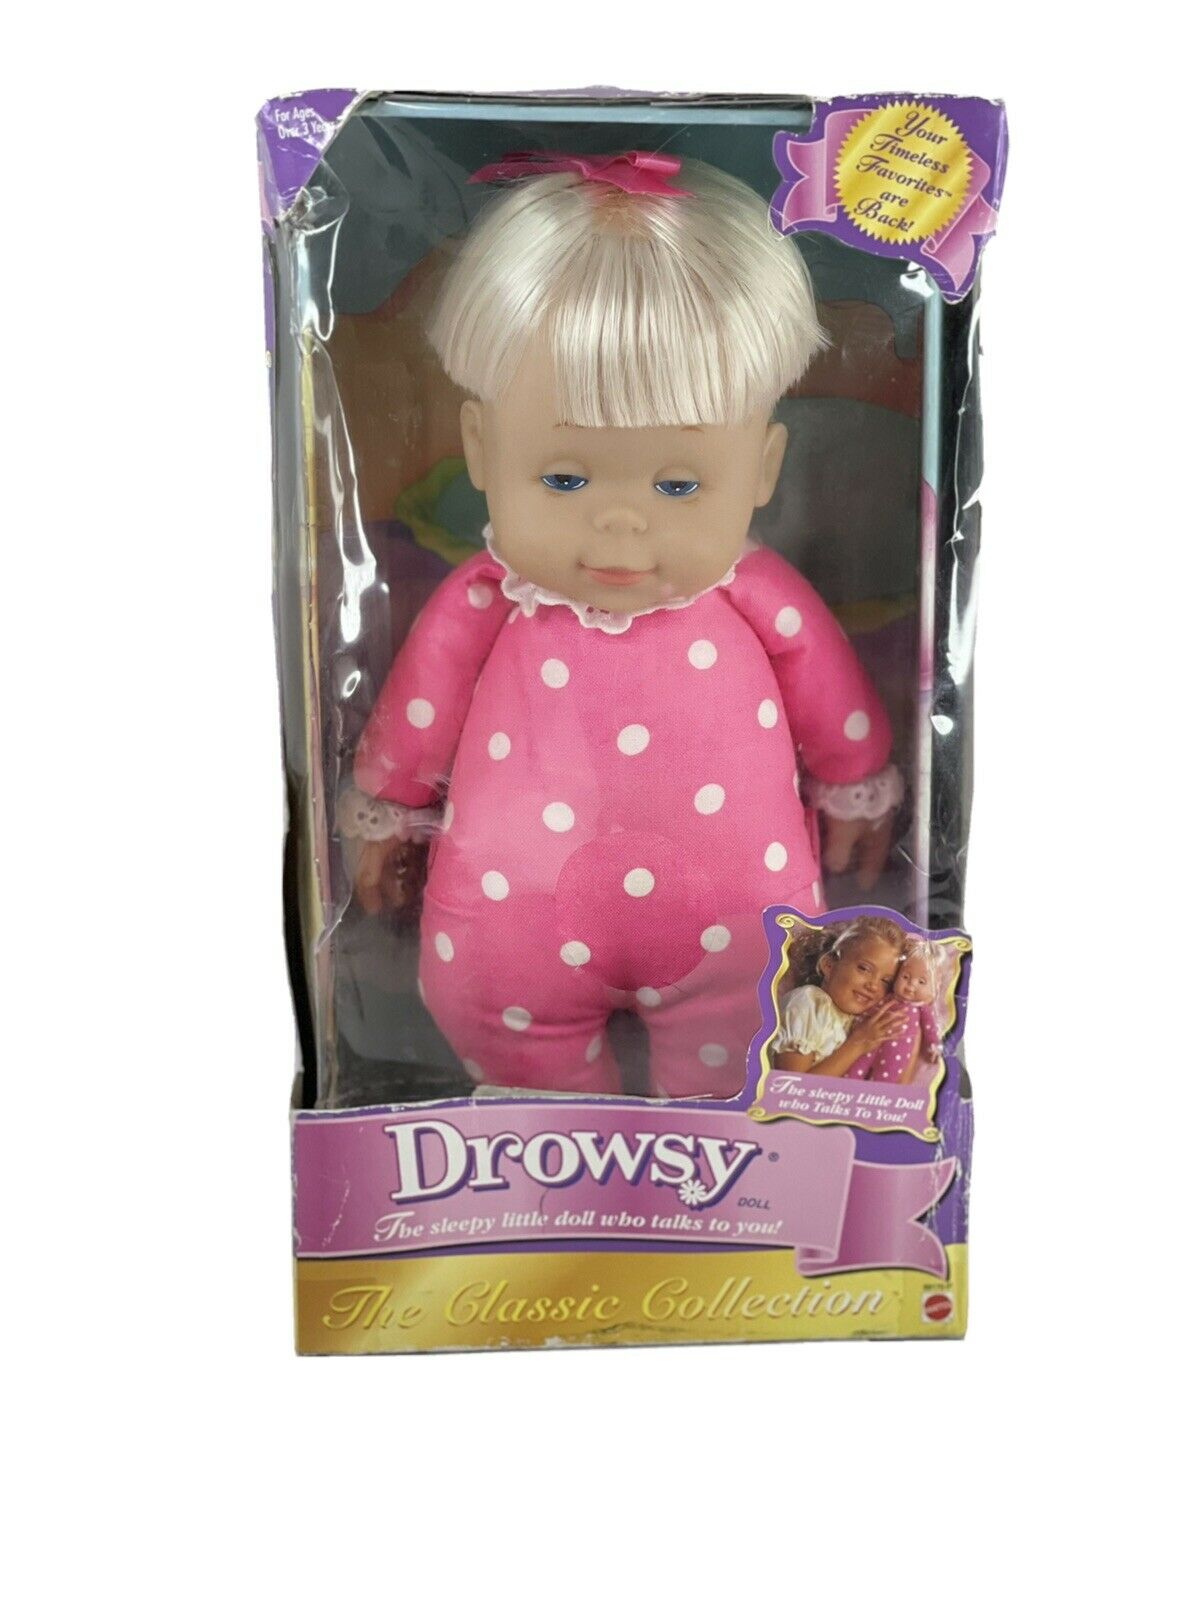 Nib Drowsy Talking Doll Mattel 15" Classic Collection 2000 Unopened Pink Vint